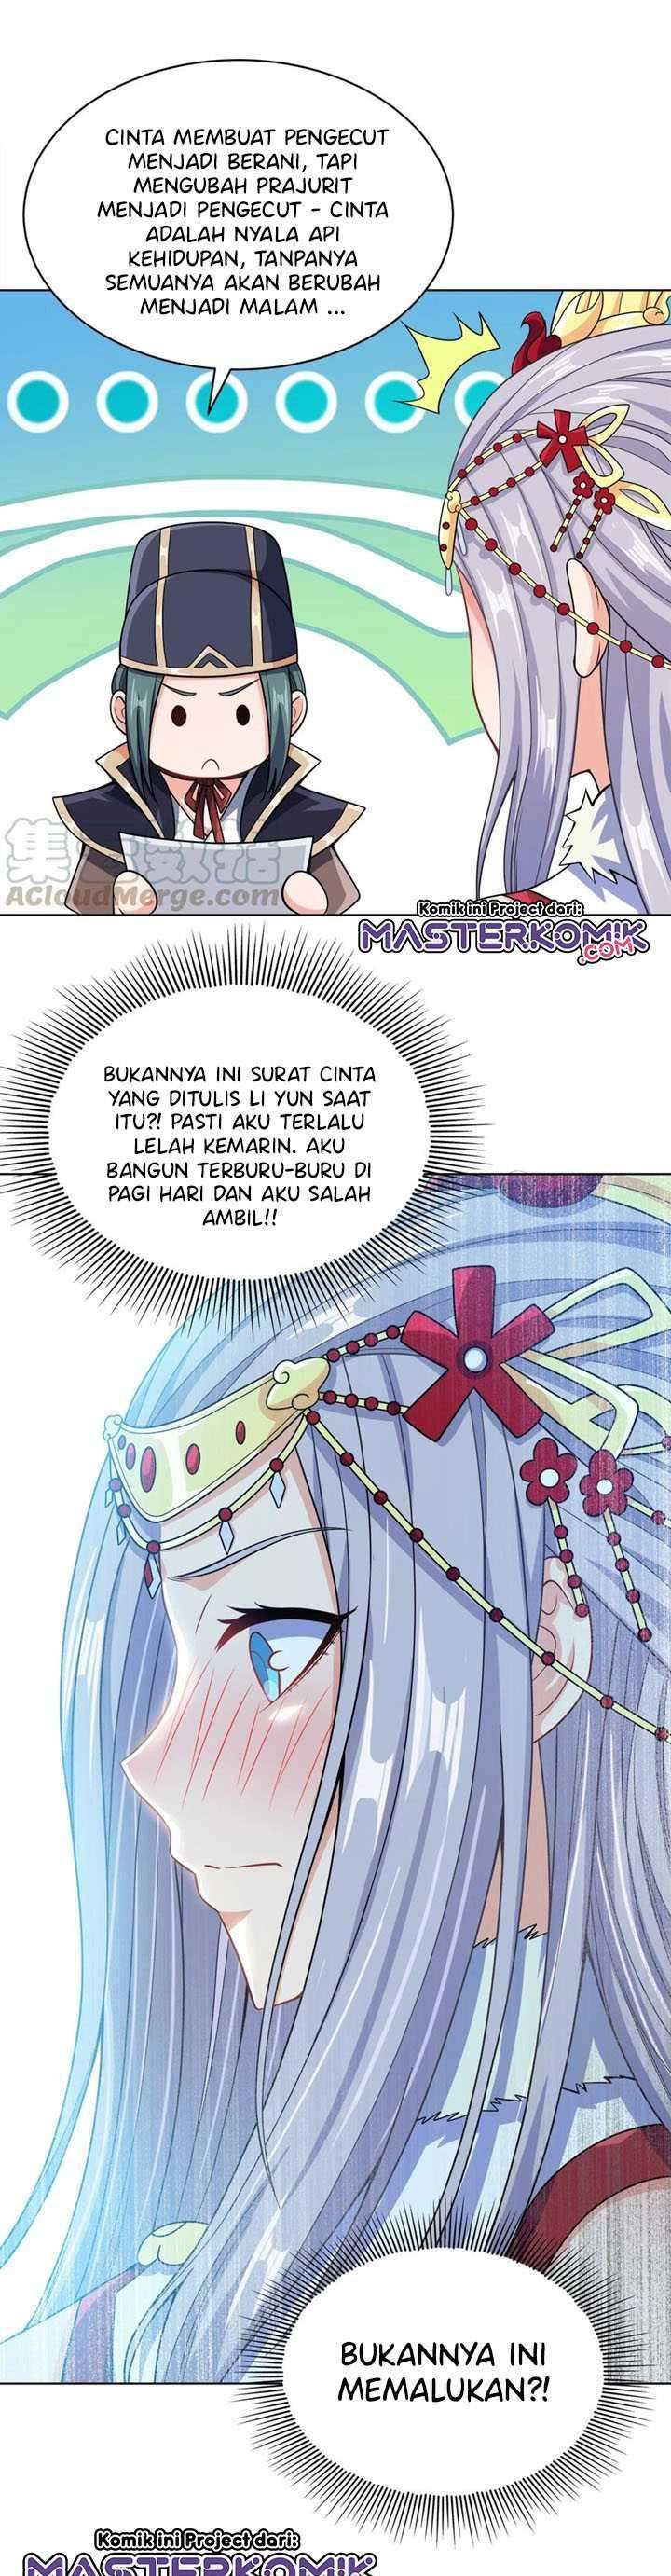 My Lady Is Actually the Empress? Chapter 30 Bahasa Indonesia